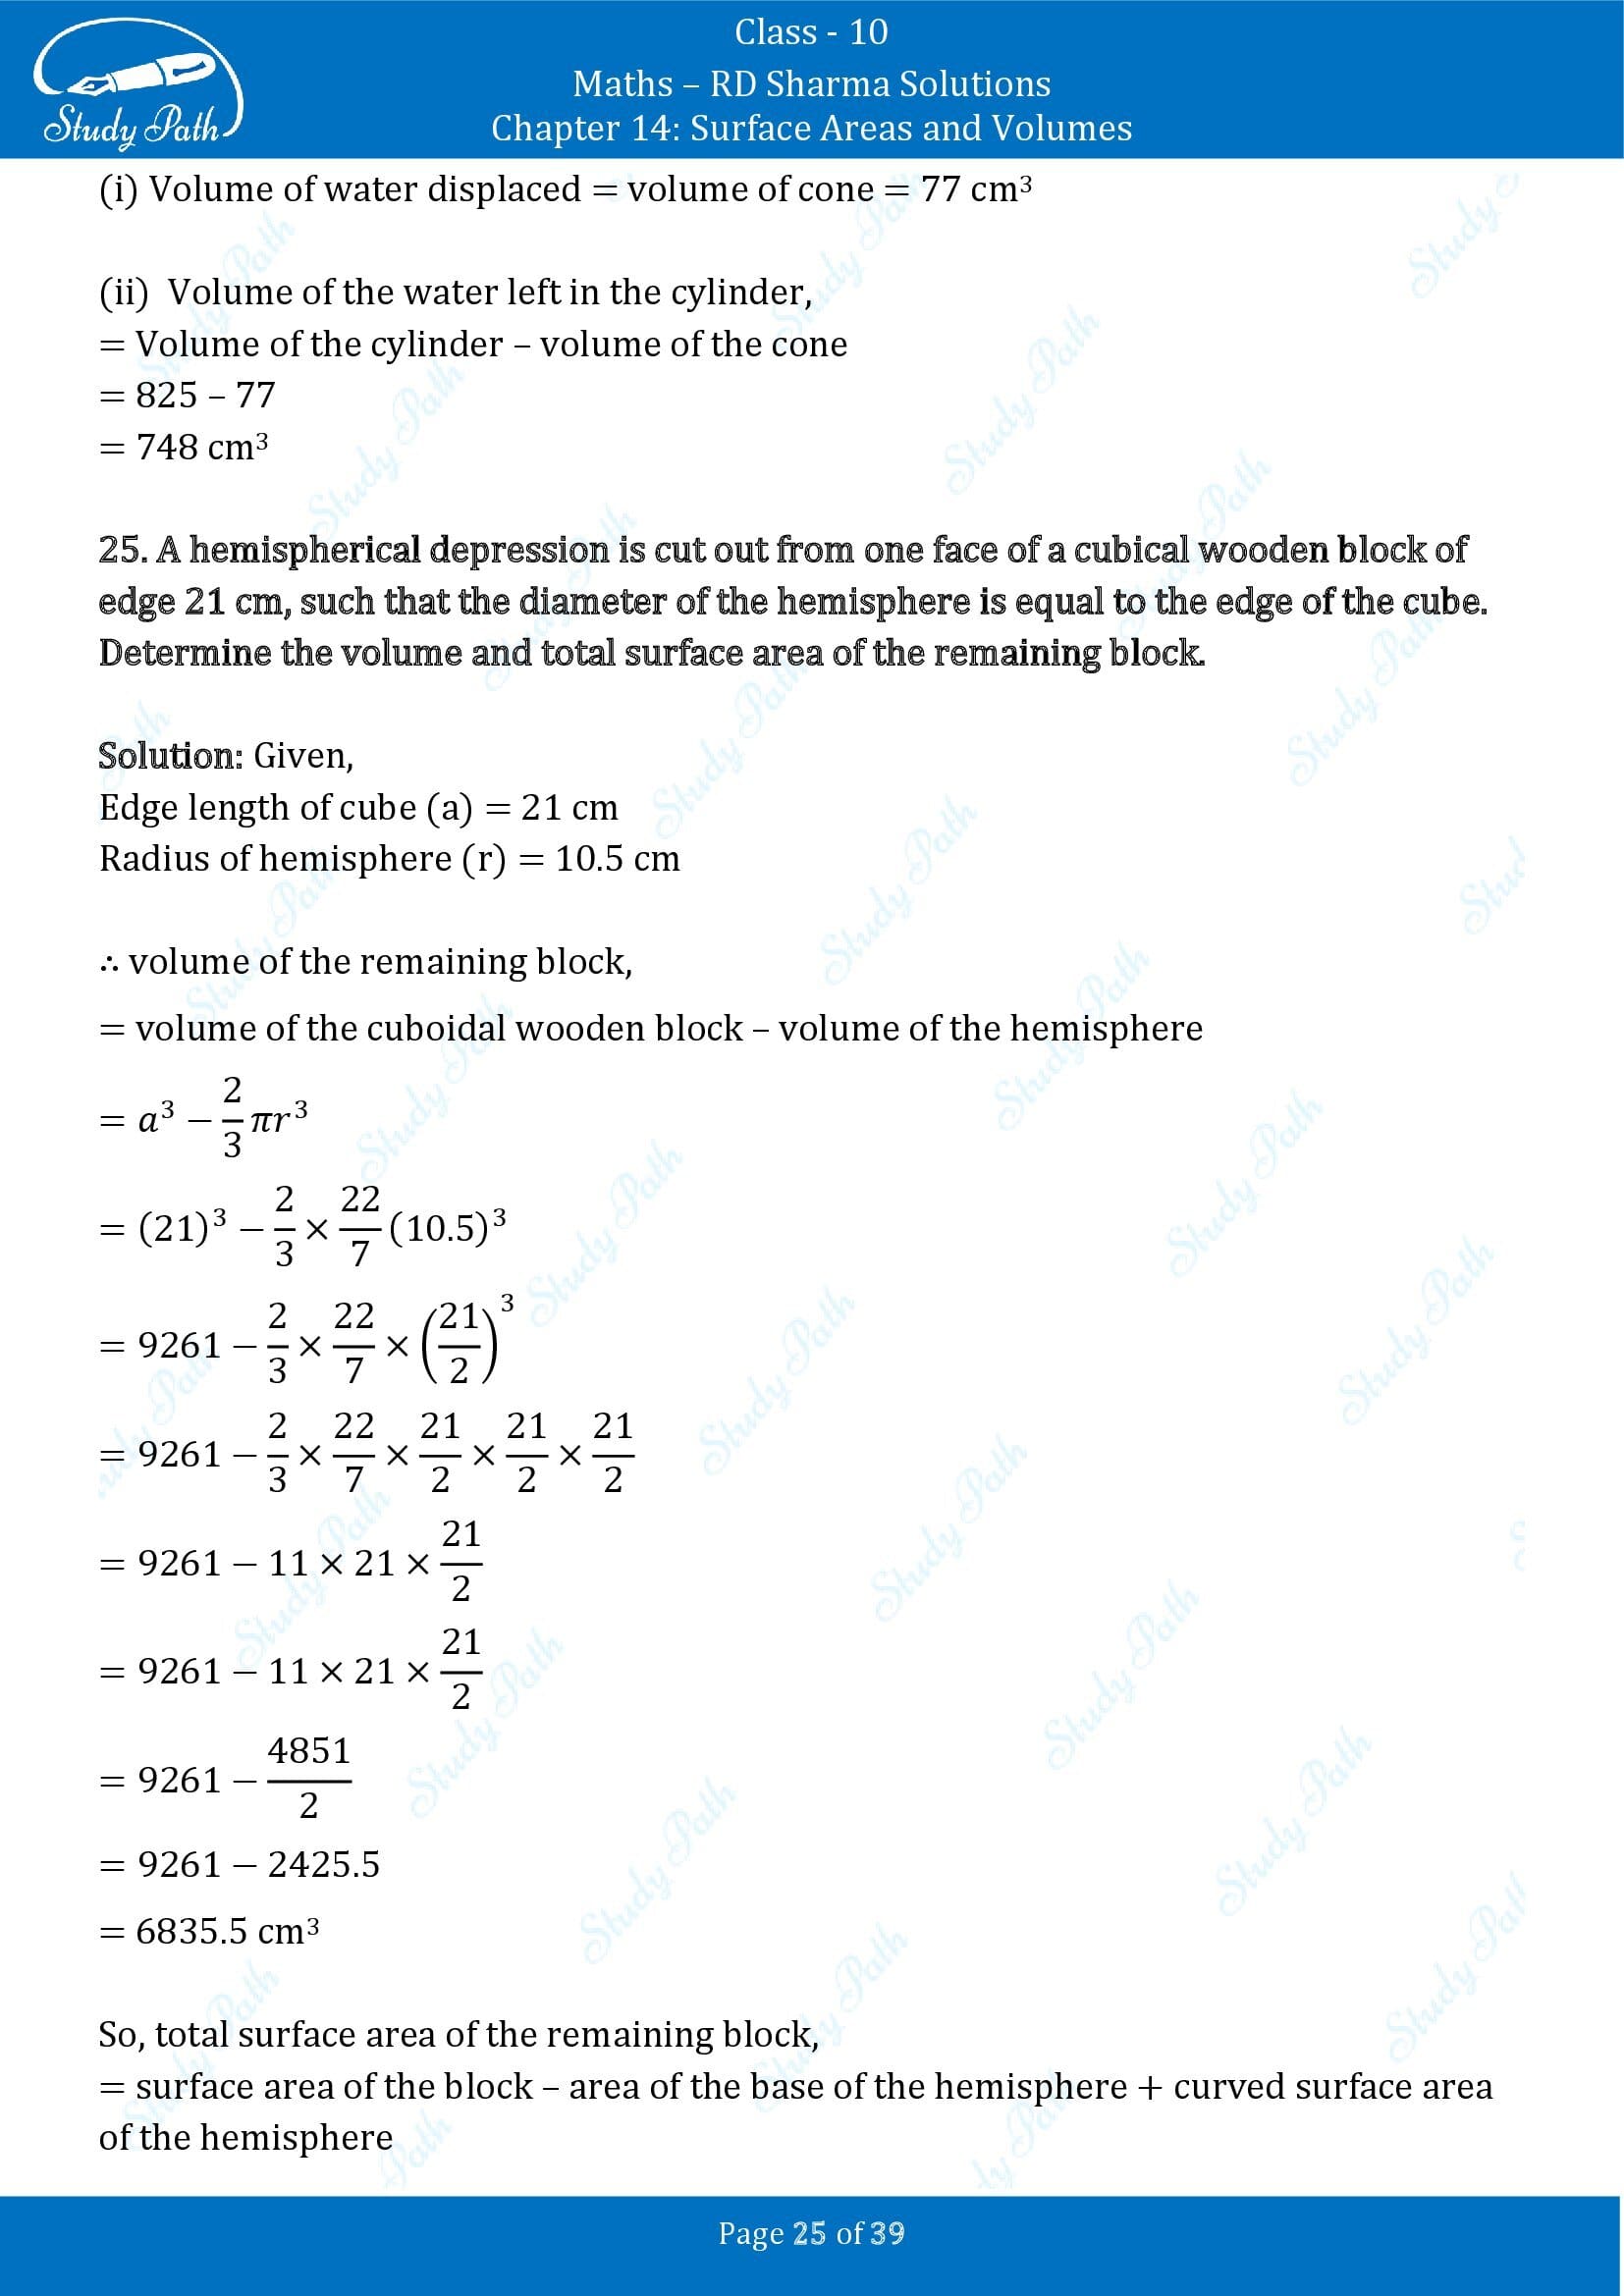 RD Sharma Solutions Class 10 Chapter 14 Surface Areas and Volumes Exercise 14.2 00025